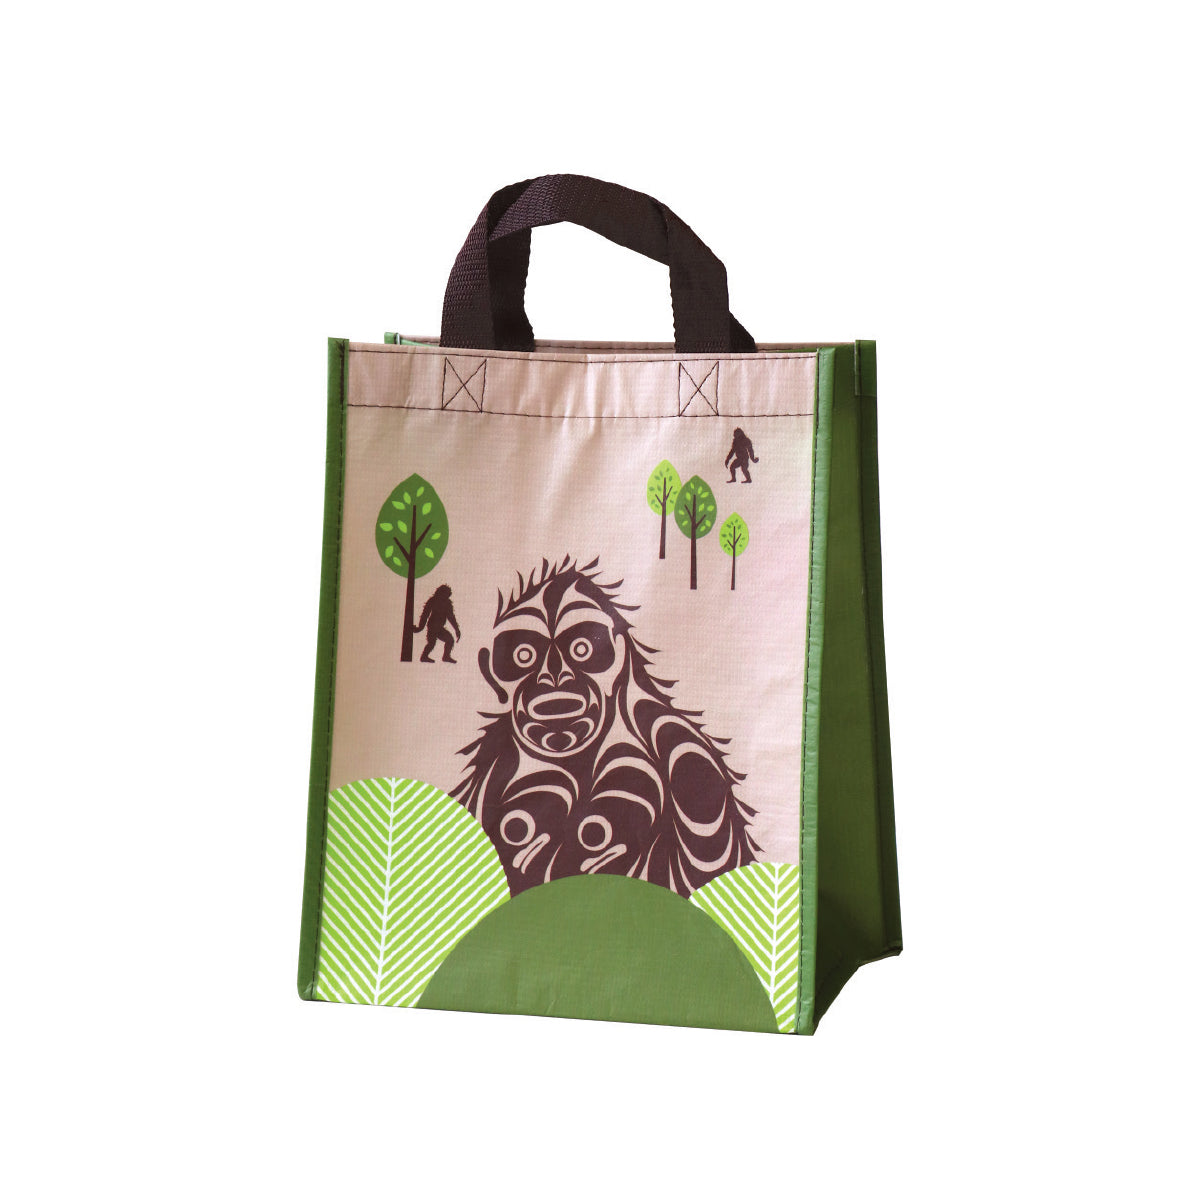 Eco Bag Small Francis Horne Sr. Sasquatch - Eco Bag Small Francis Horne Sr. Sasquatch -  - House of Himwitsa Native Art Gallery and Gifts